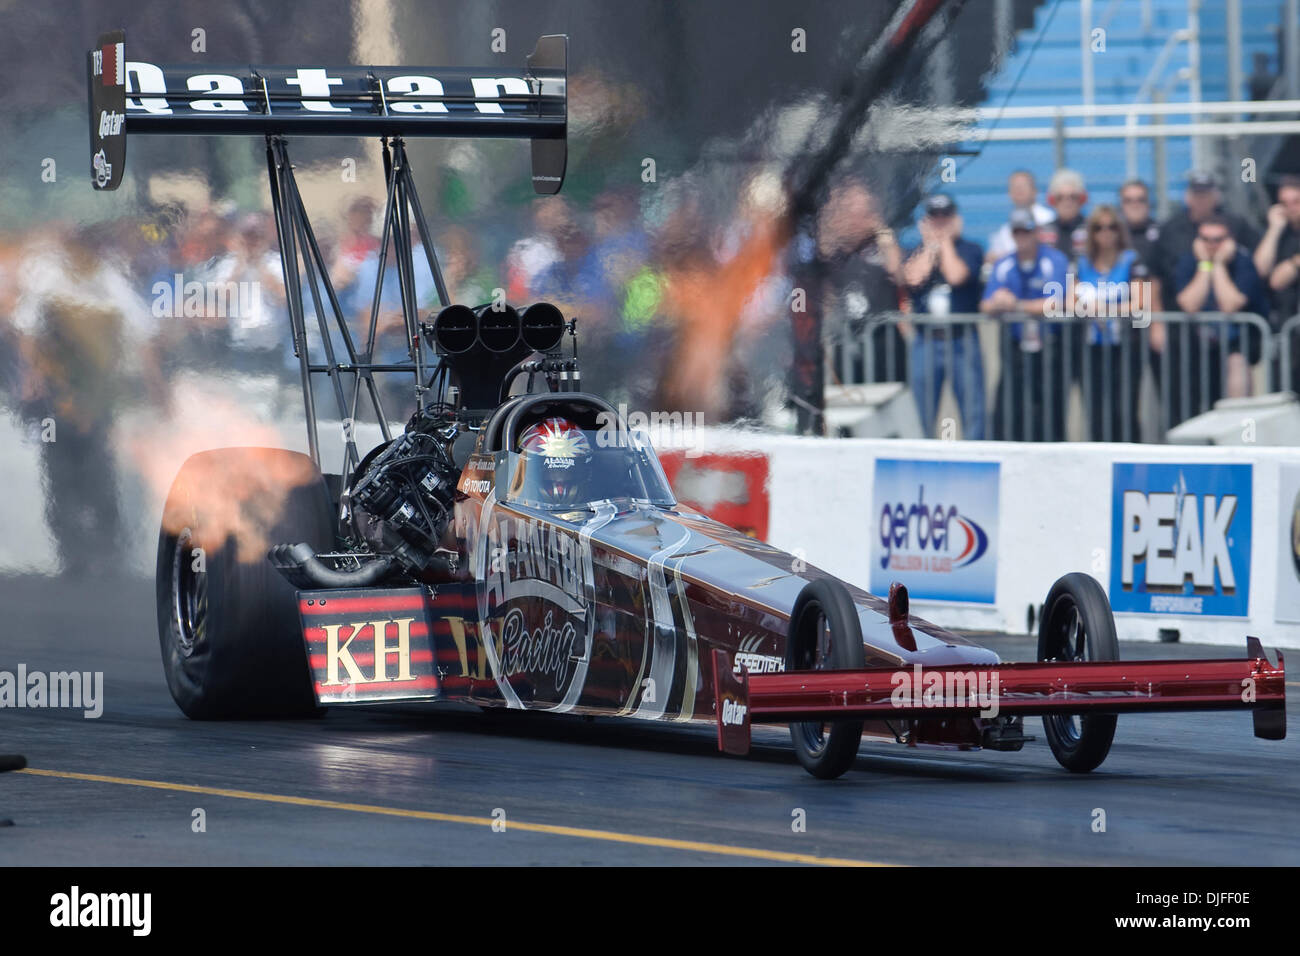 Larry Dixon Heads Down The Track In His Al Anabi Racing Top Fuel Dragster On His Way To A First 